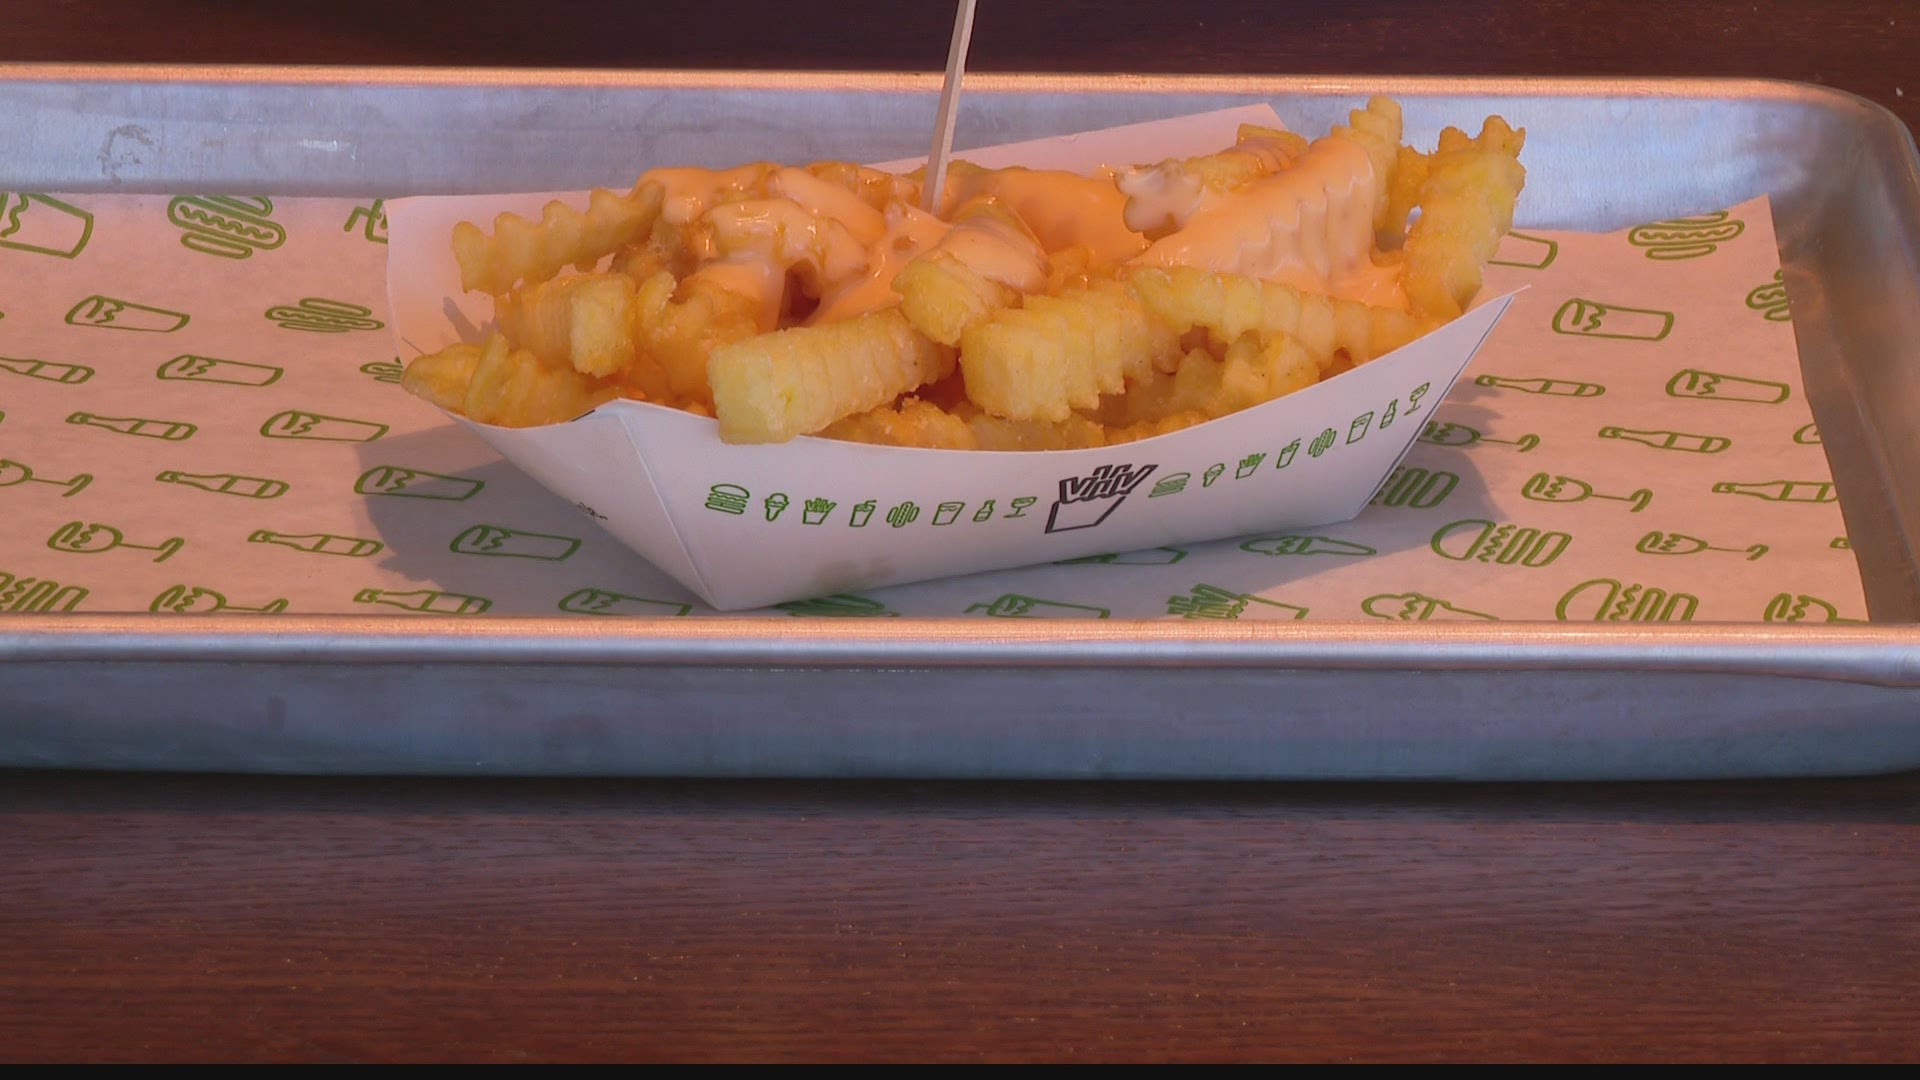 The Fishers location also debuted Shake Shack’s first Shack Track app-thru lane.